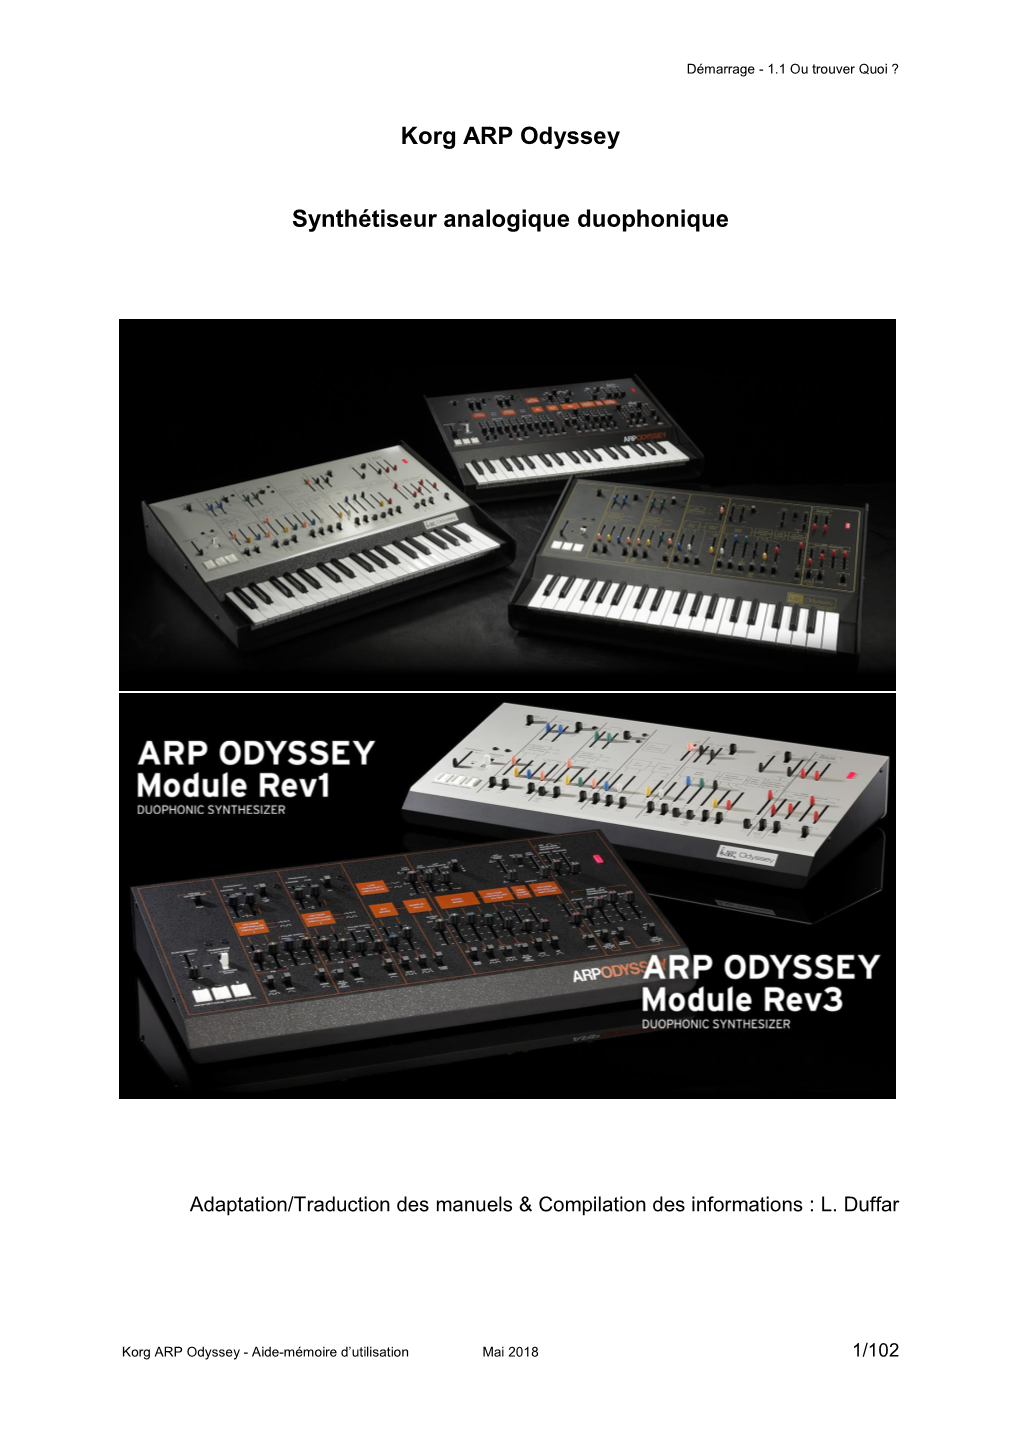 Korg ARP Odyssey Synthétiseur Analogique Duophonique